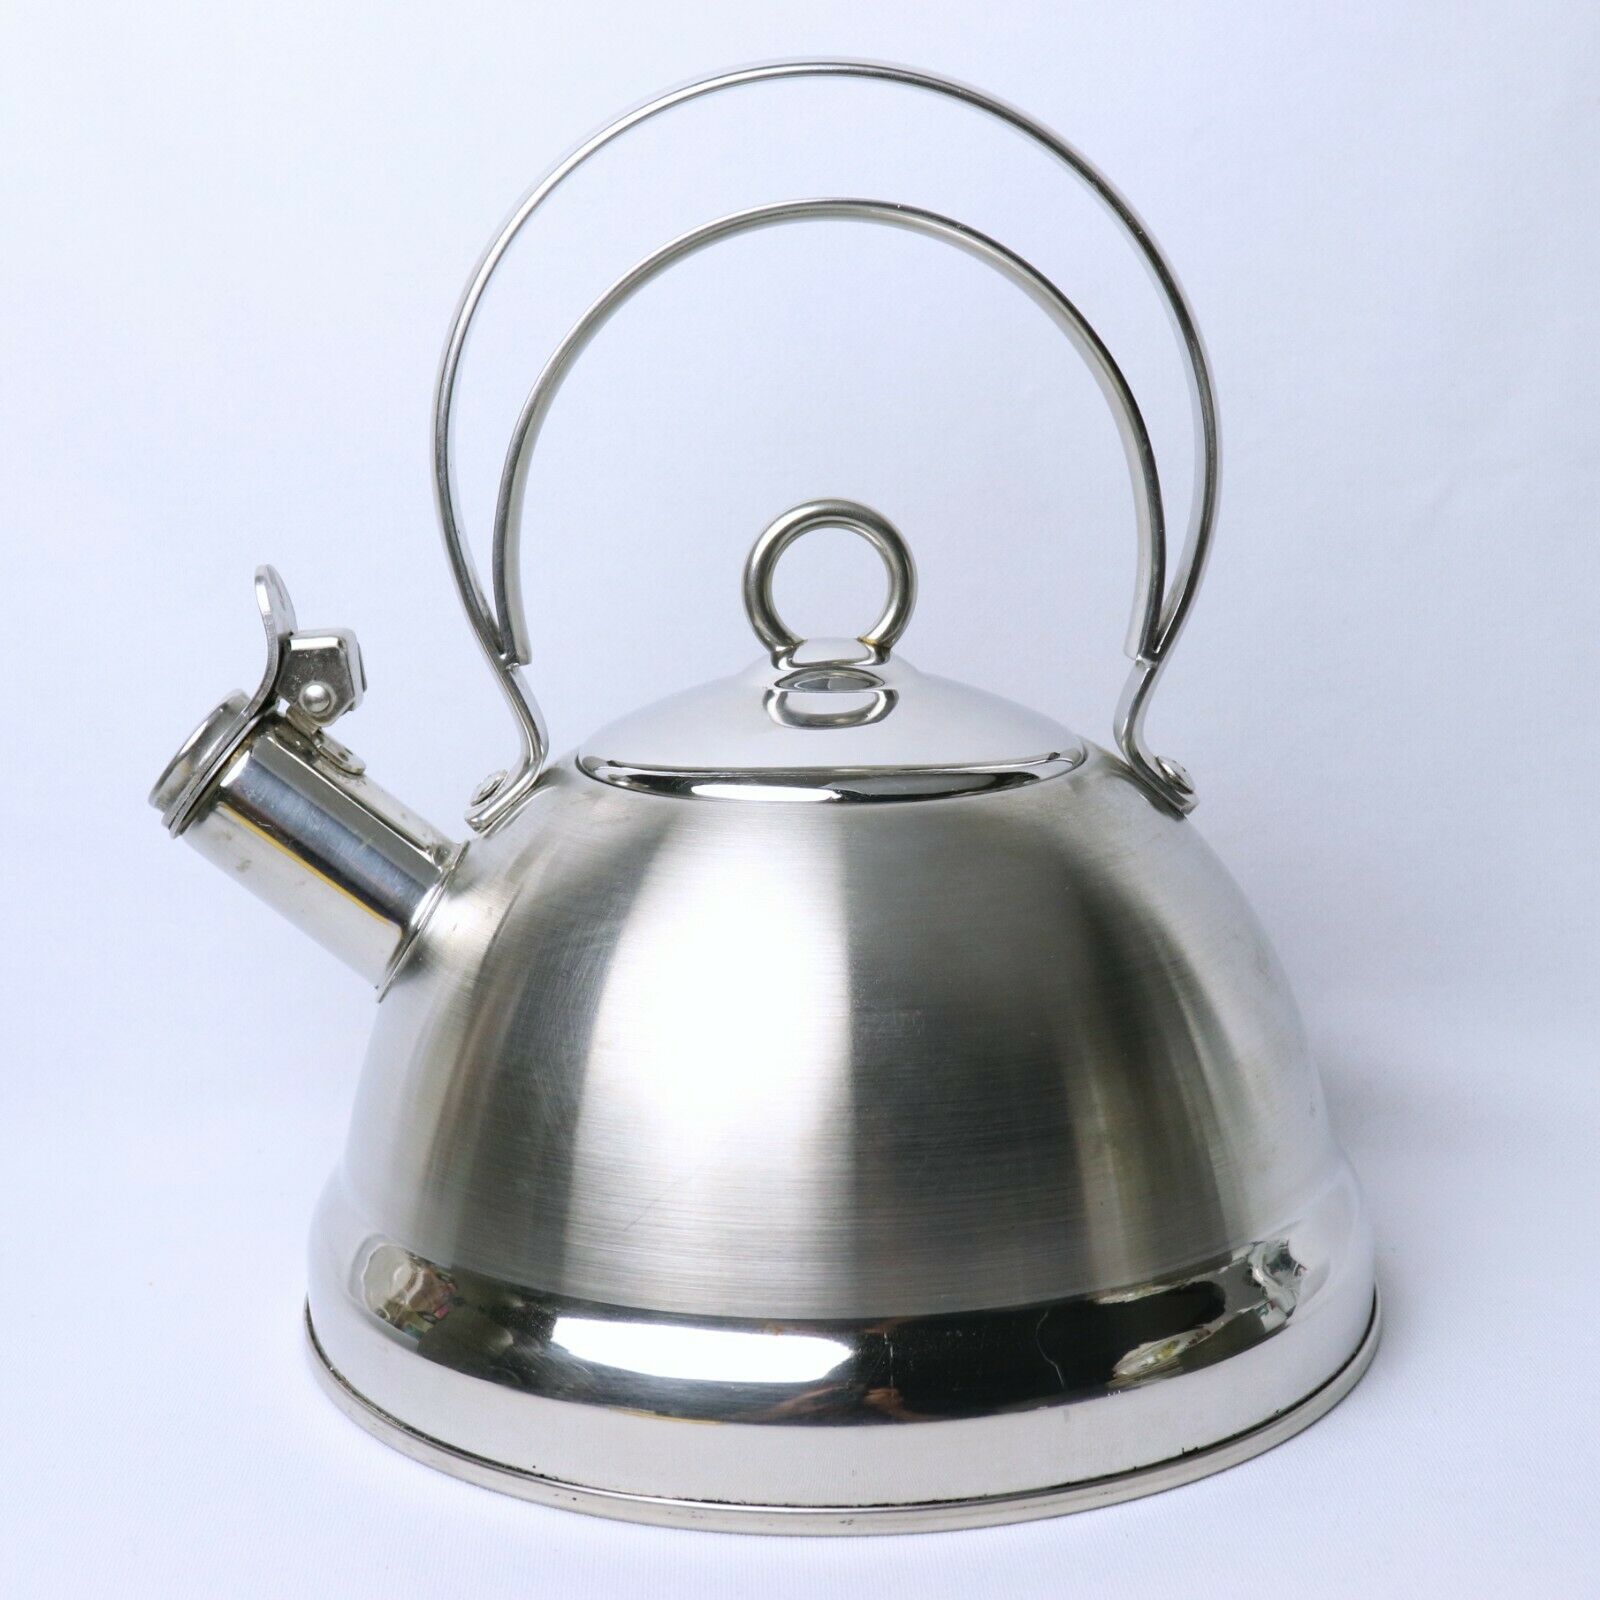 Betty Crocker By Mainstays - Retro Whistling Water Tea Kettle - Stainless Steel